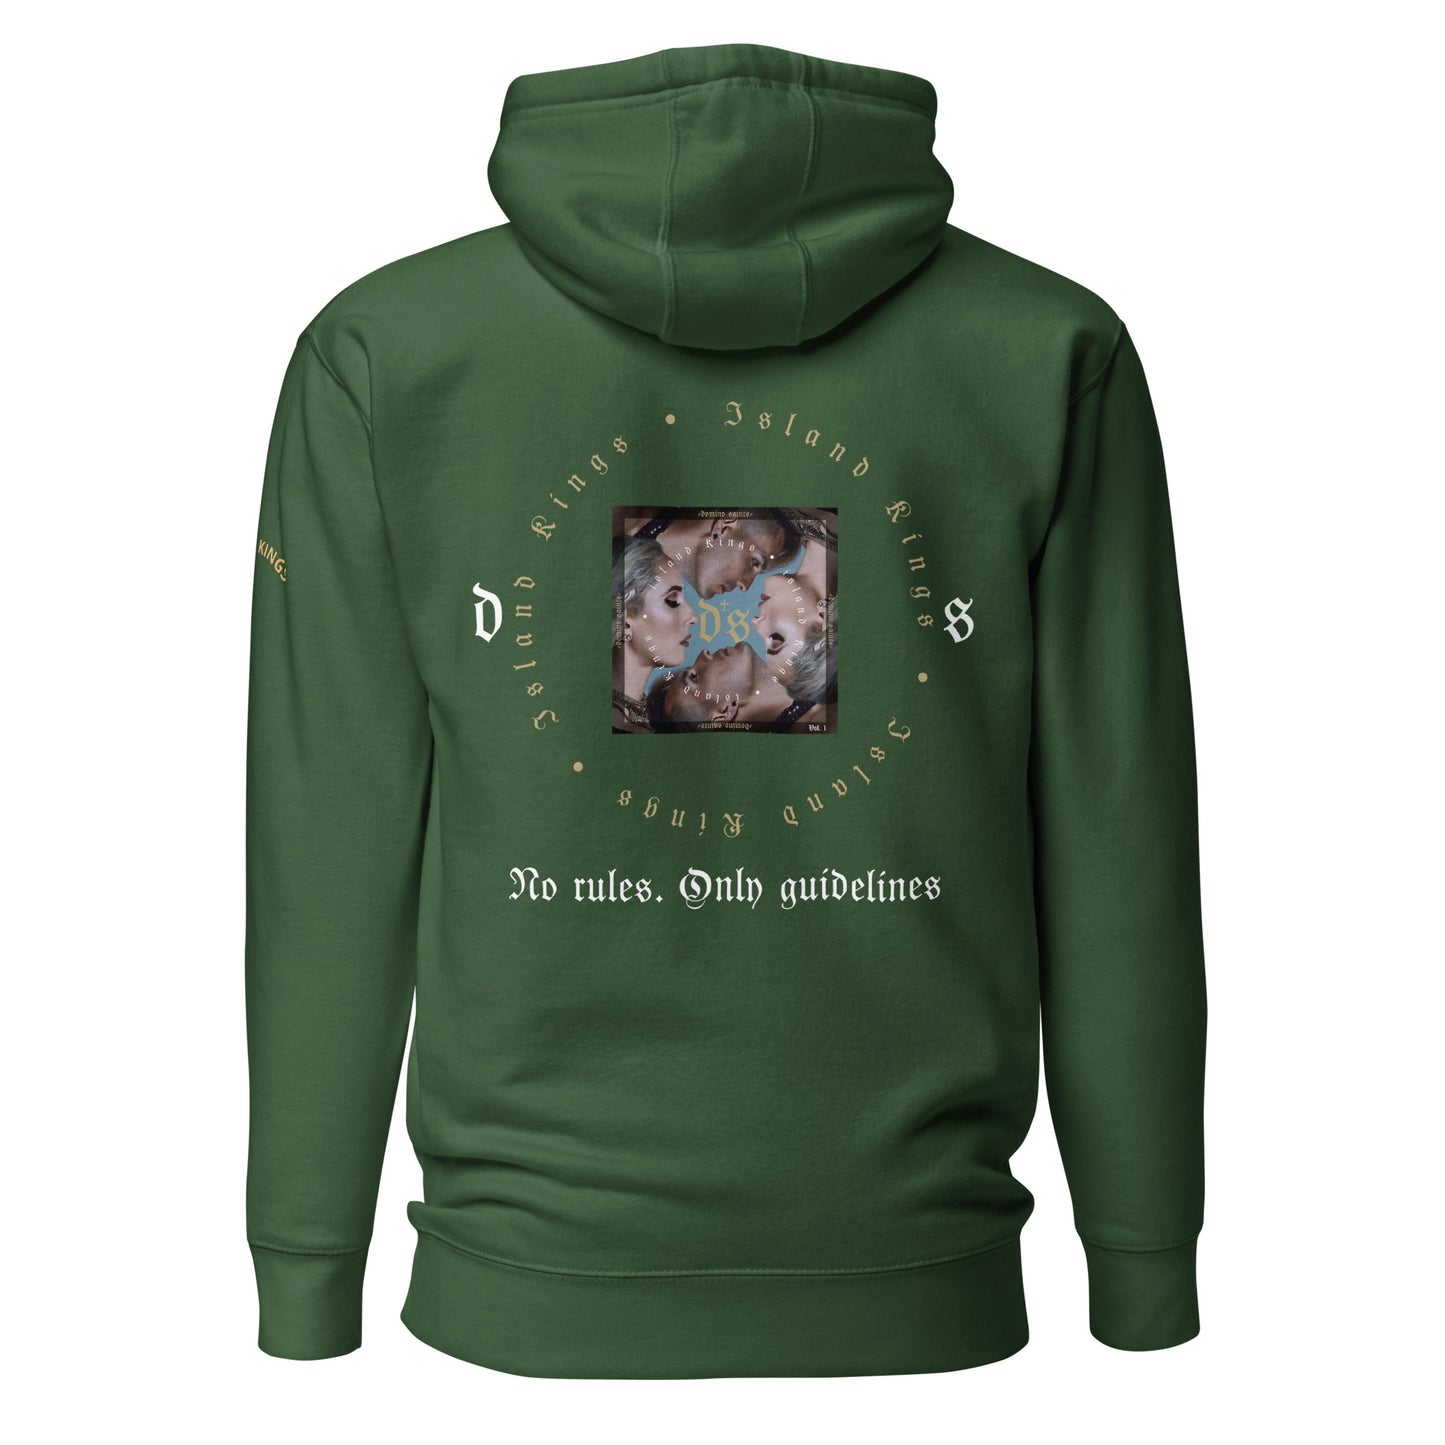 Embrace the Vibe -DS Island Kings Unisex Hoodie